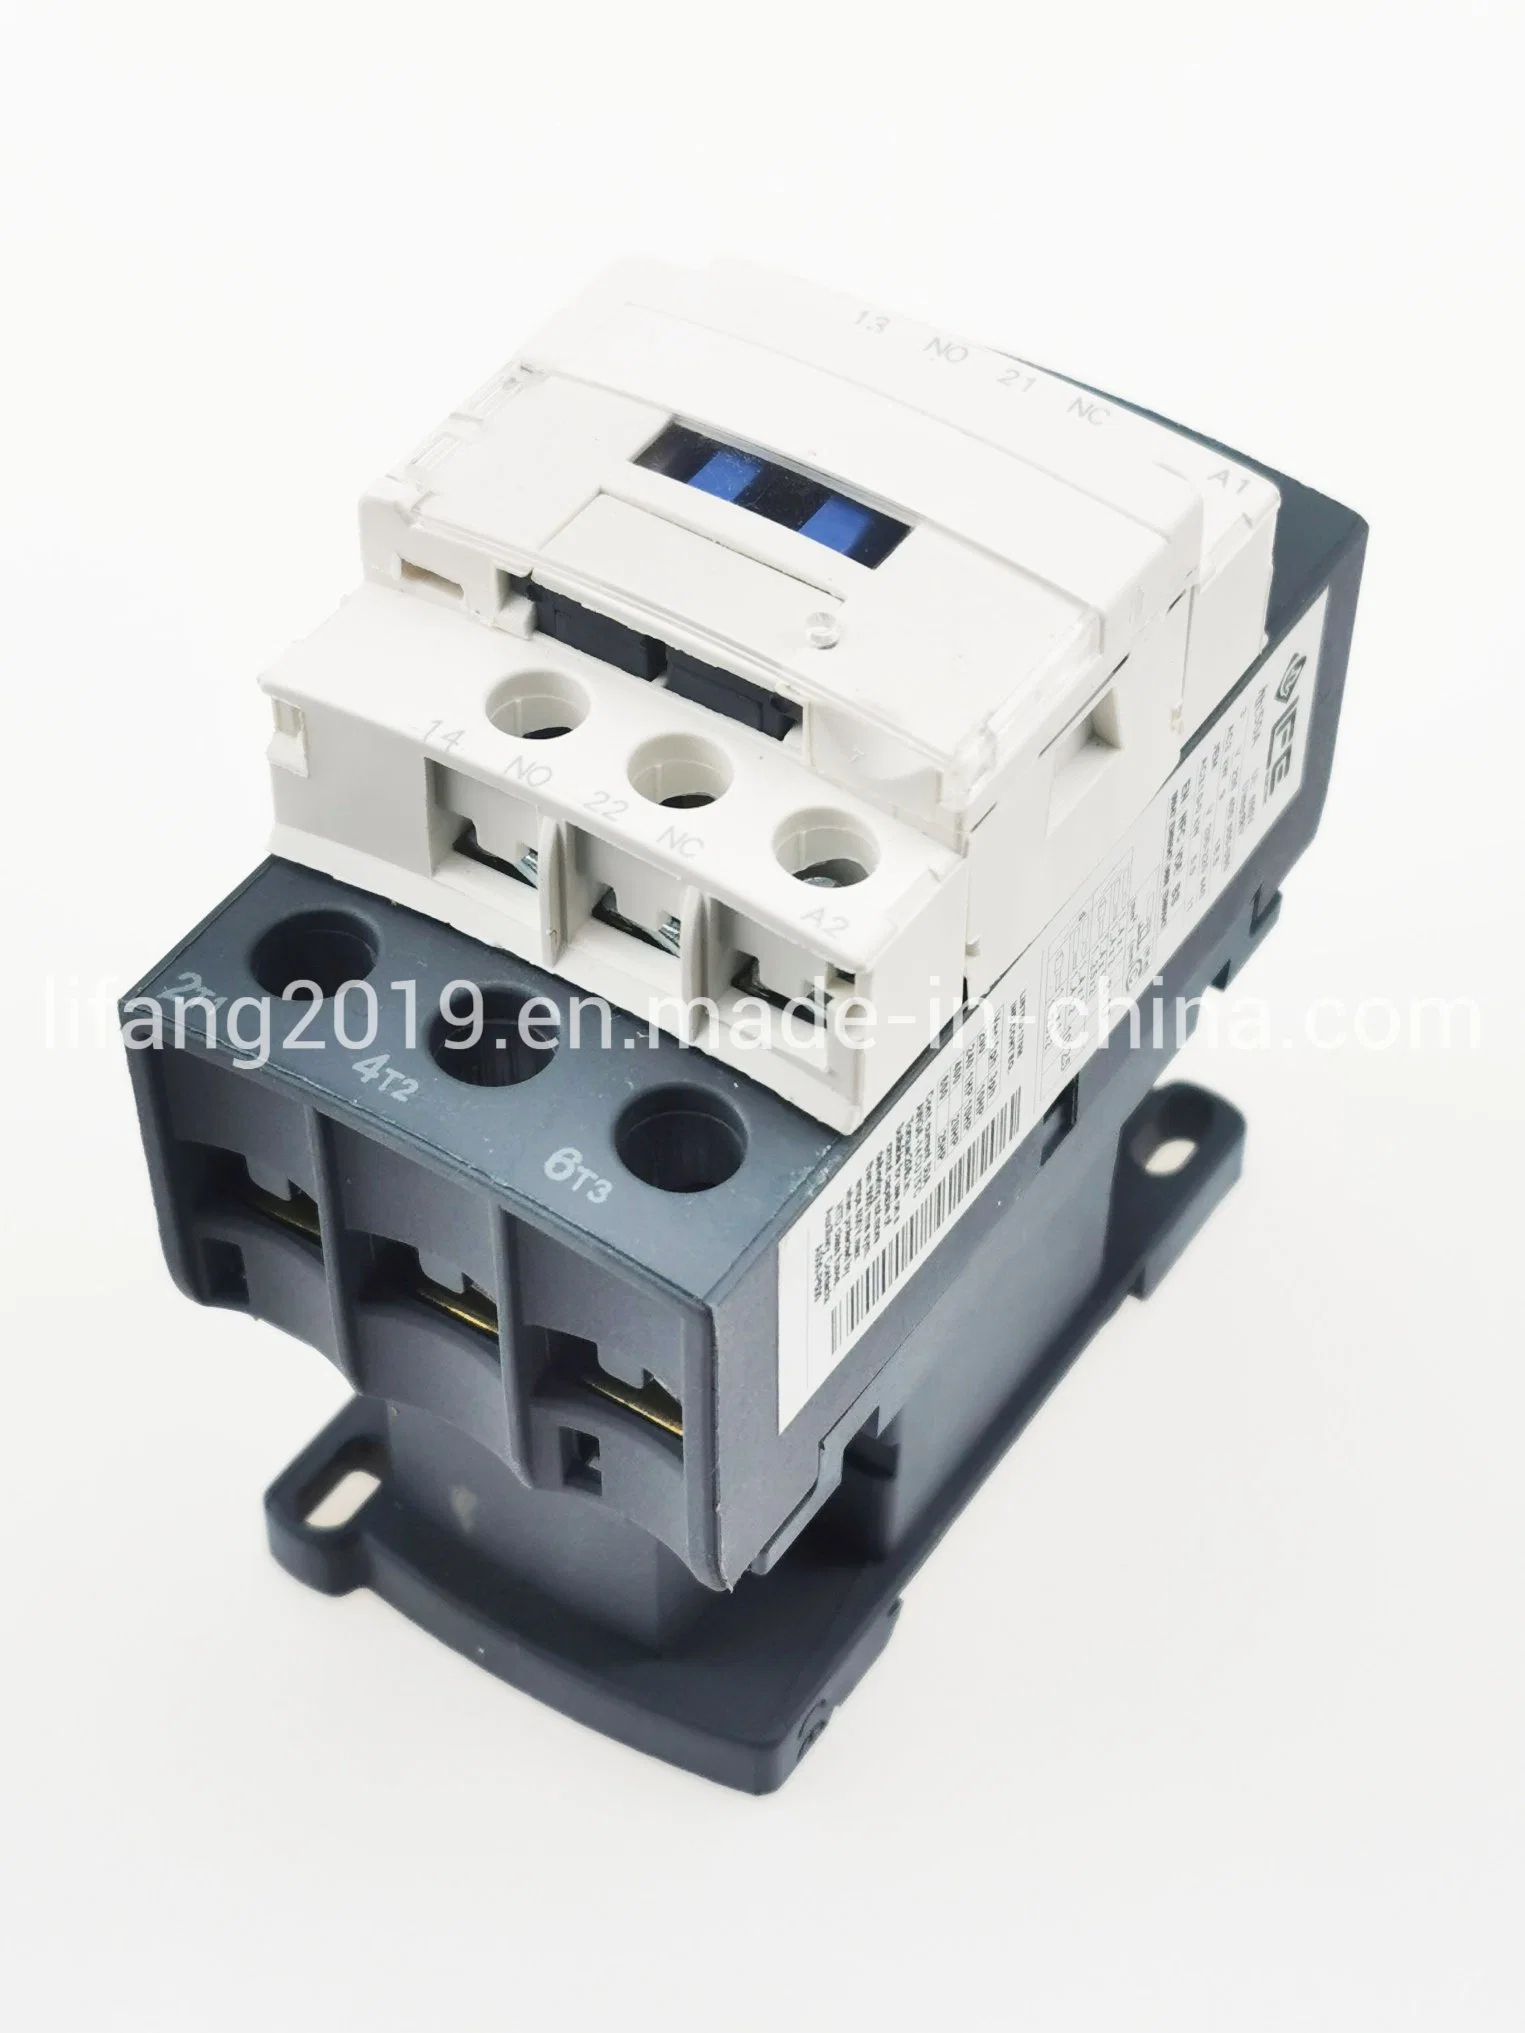 LC1-D9511 AC Contacors, Ce Proved AC Contactors, ISO9001 Proved High quality/High cost performance AC Contactors